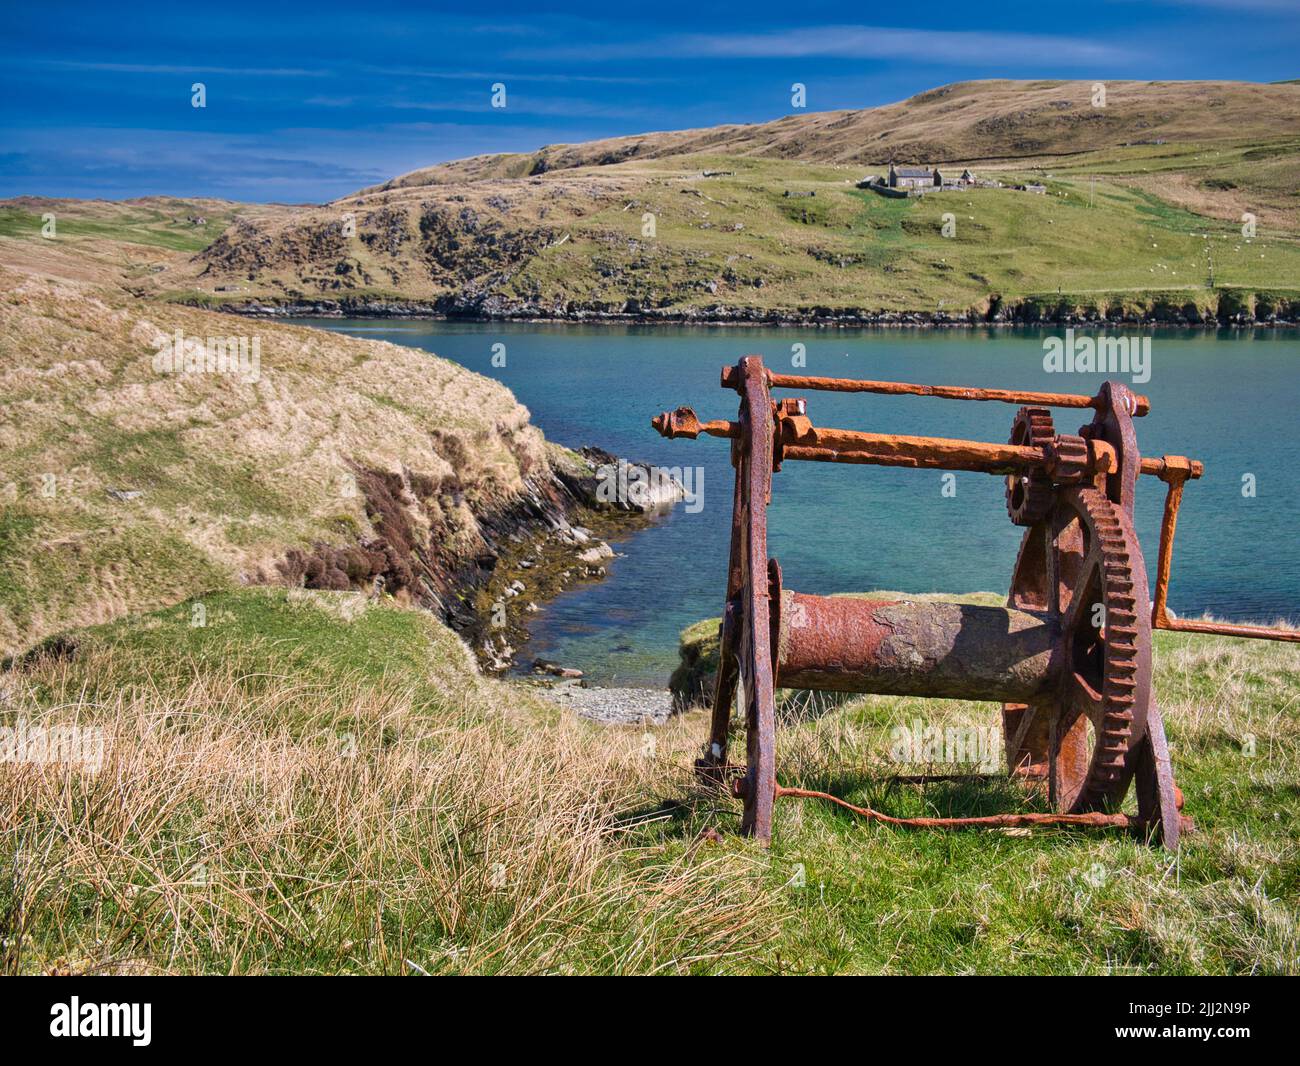 An abandoned, rusting boat winch with beach below in Shetland, UK, taken on a sunny day with blue sea in the background. Stock Photo